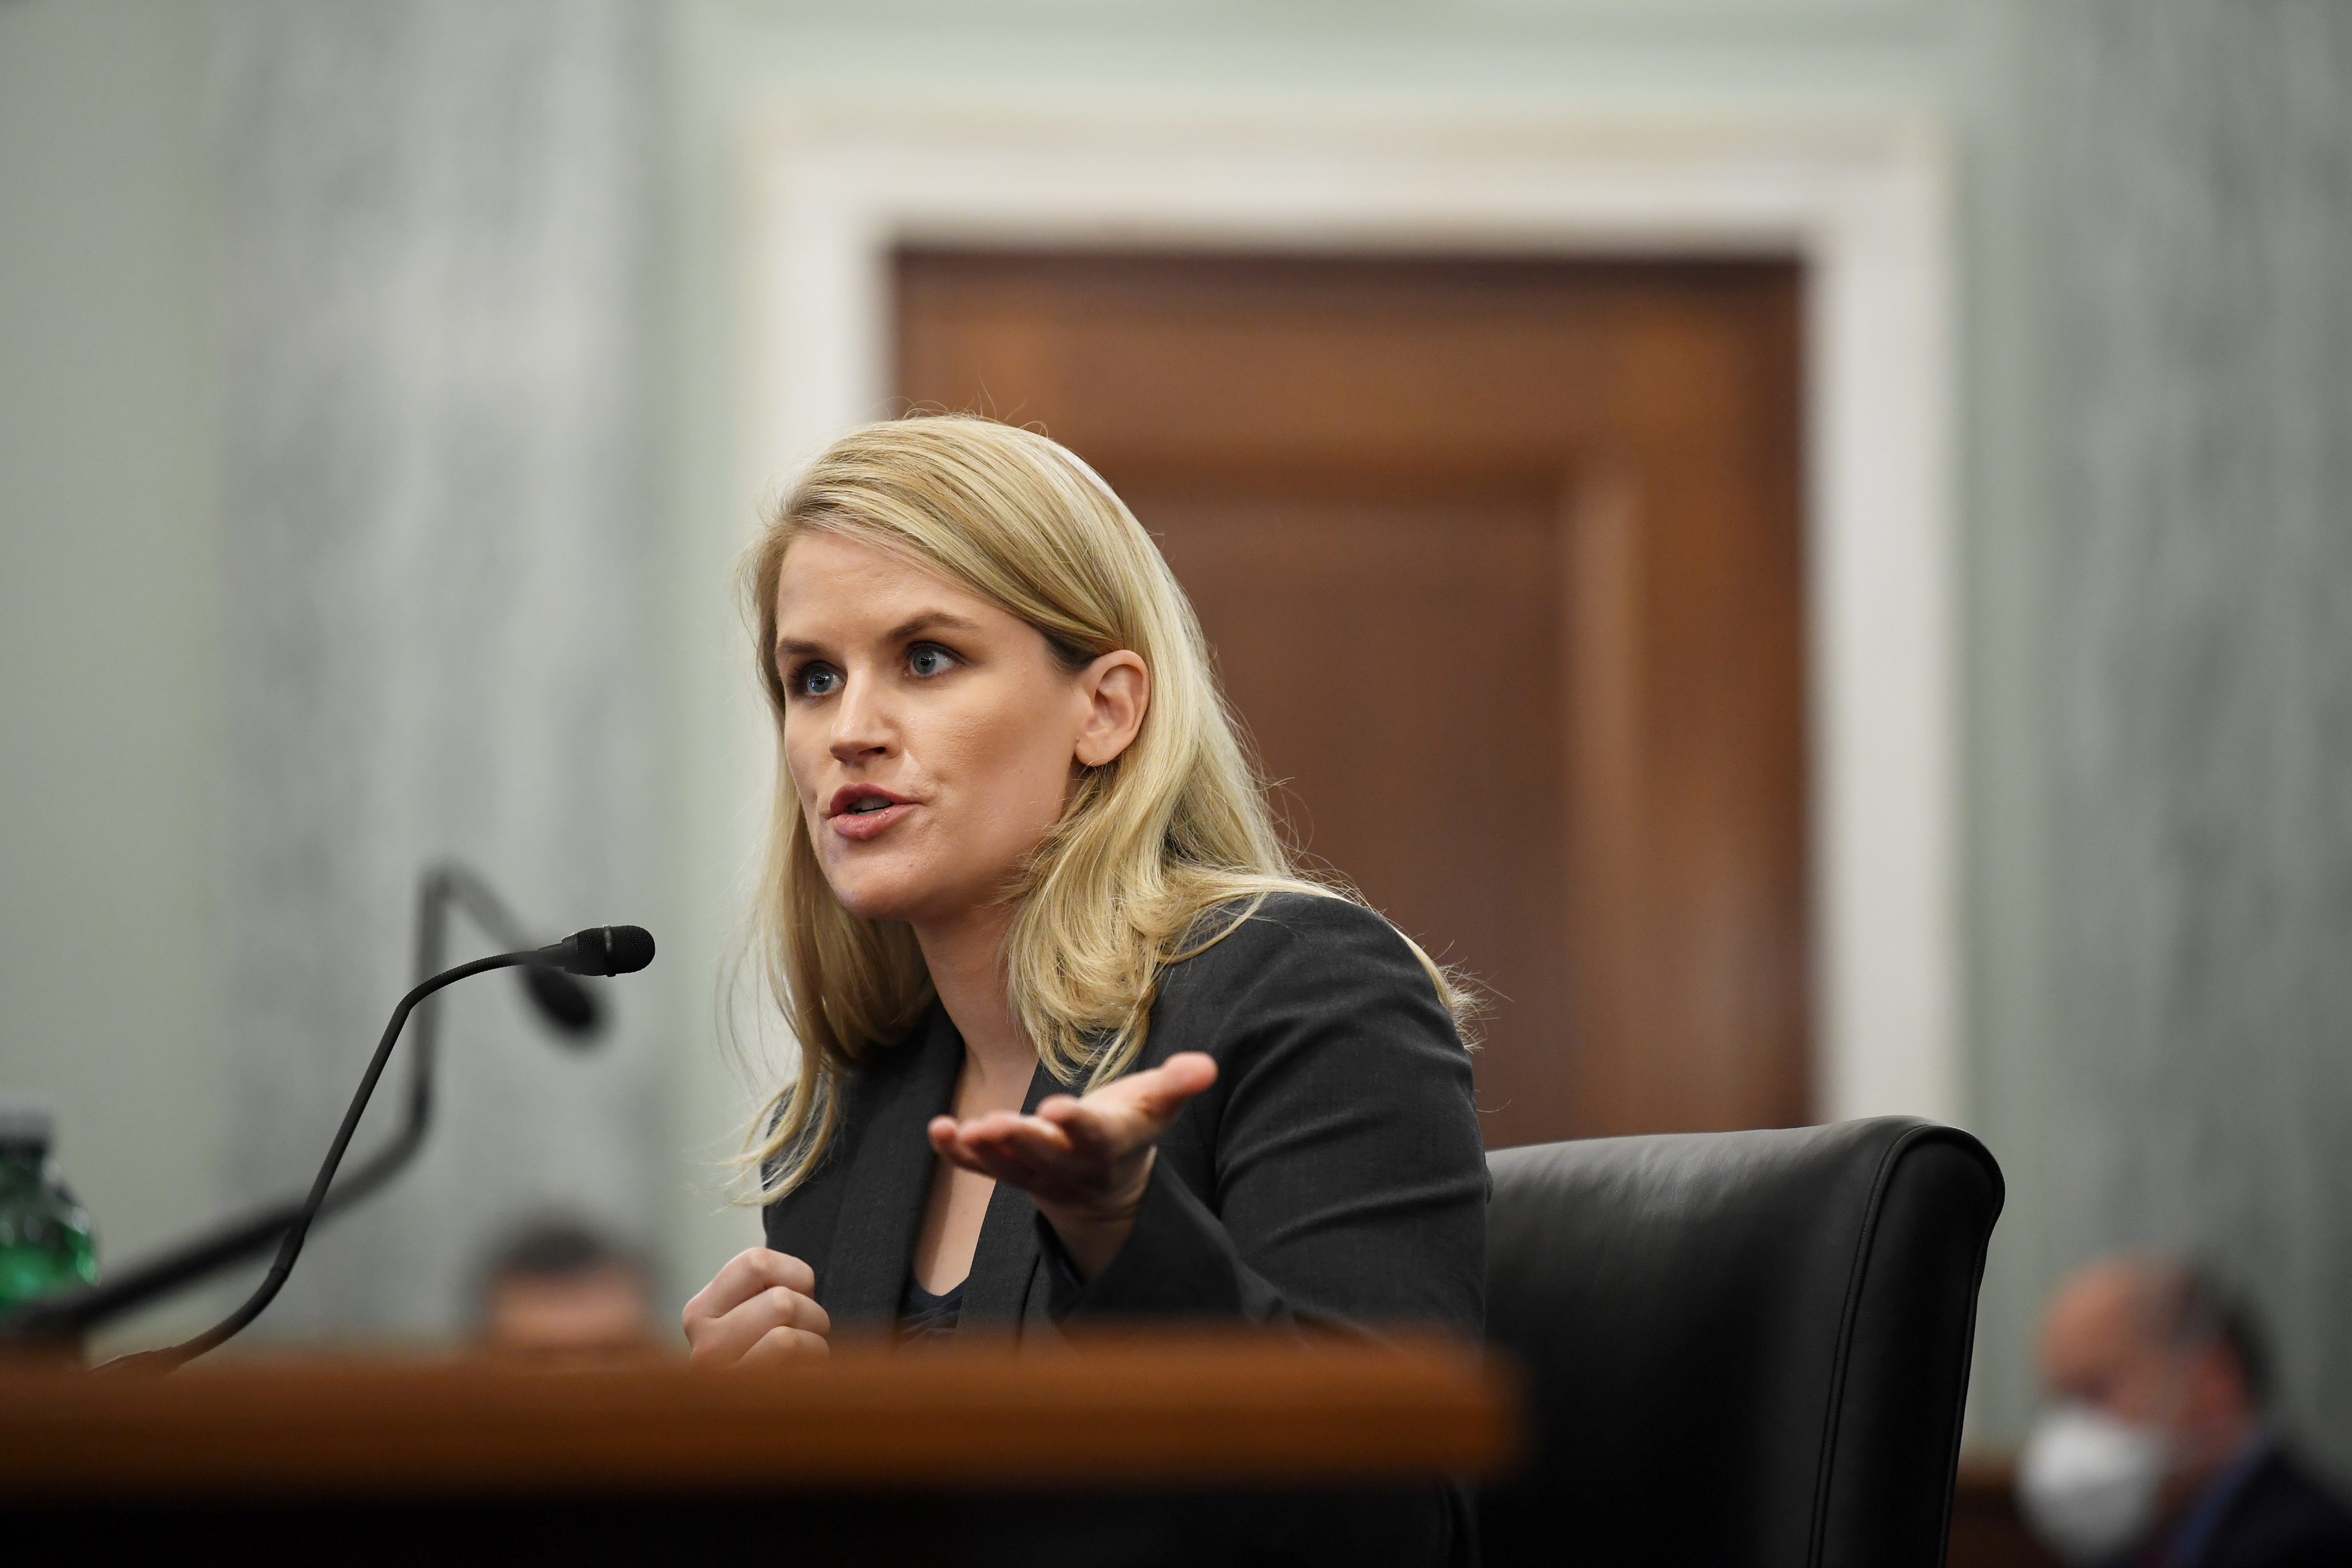 Former Facebook employee and whistleblower Frances Haugen testifies during a Senate Committee on Commerce, Science, and Transportation hearing entitled 'Protecting Kids Online: Testimony from a Facebook Whistleblower' on Capitol Hill, in Washington, U.S., October 5, 2021.  Matt McClain/Pool via REUTERS